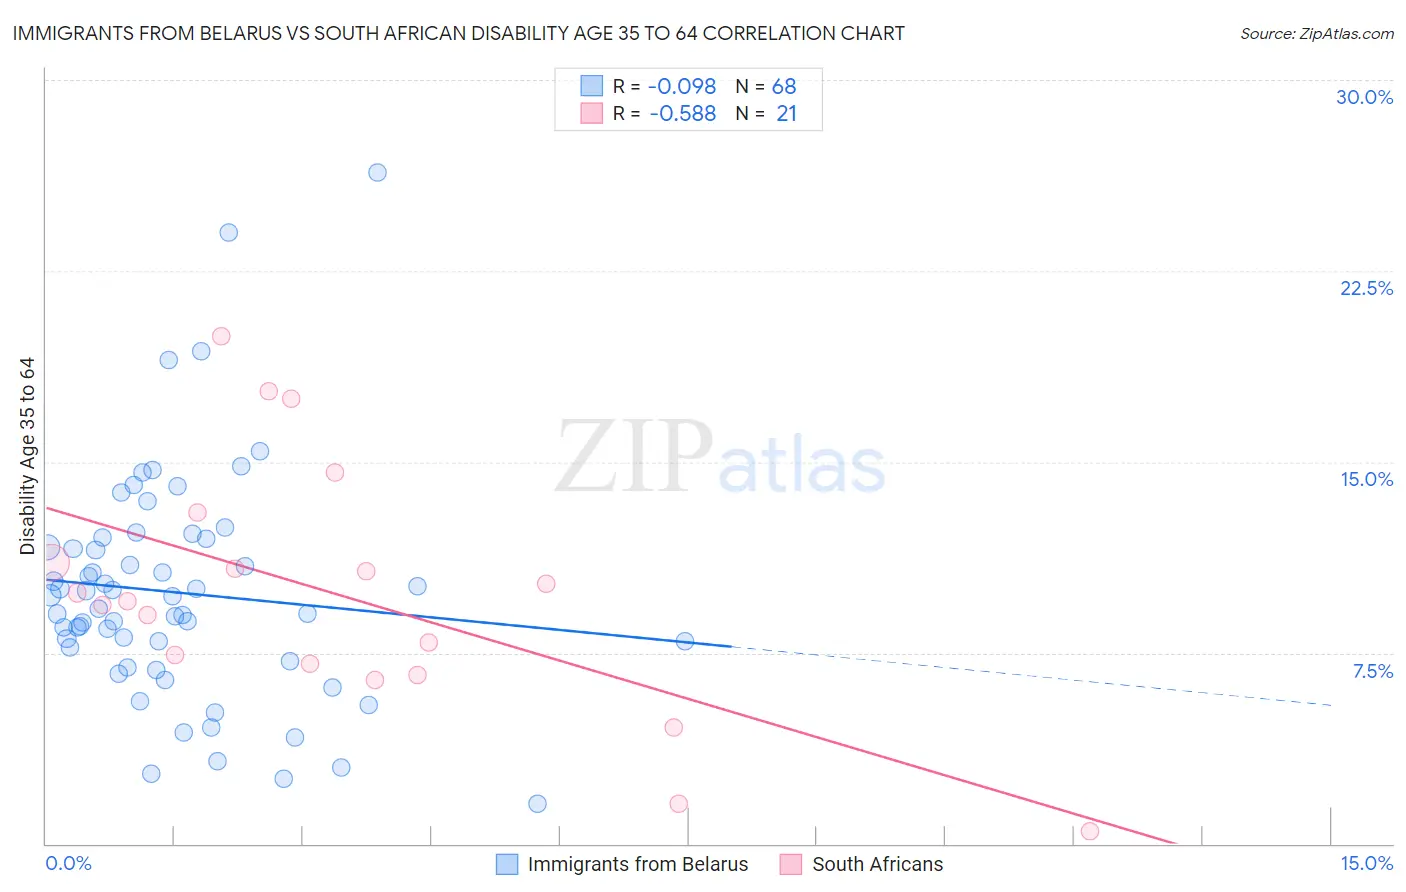 Immigrants from Belarus vs South African Disability Age 35 to 64